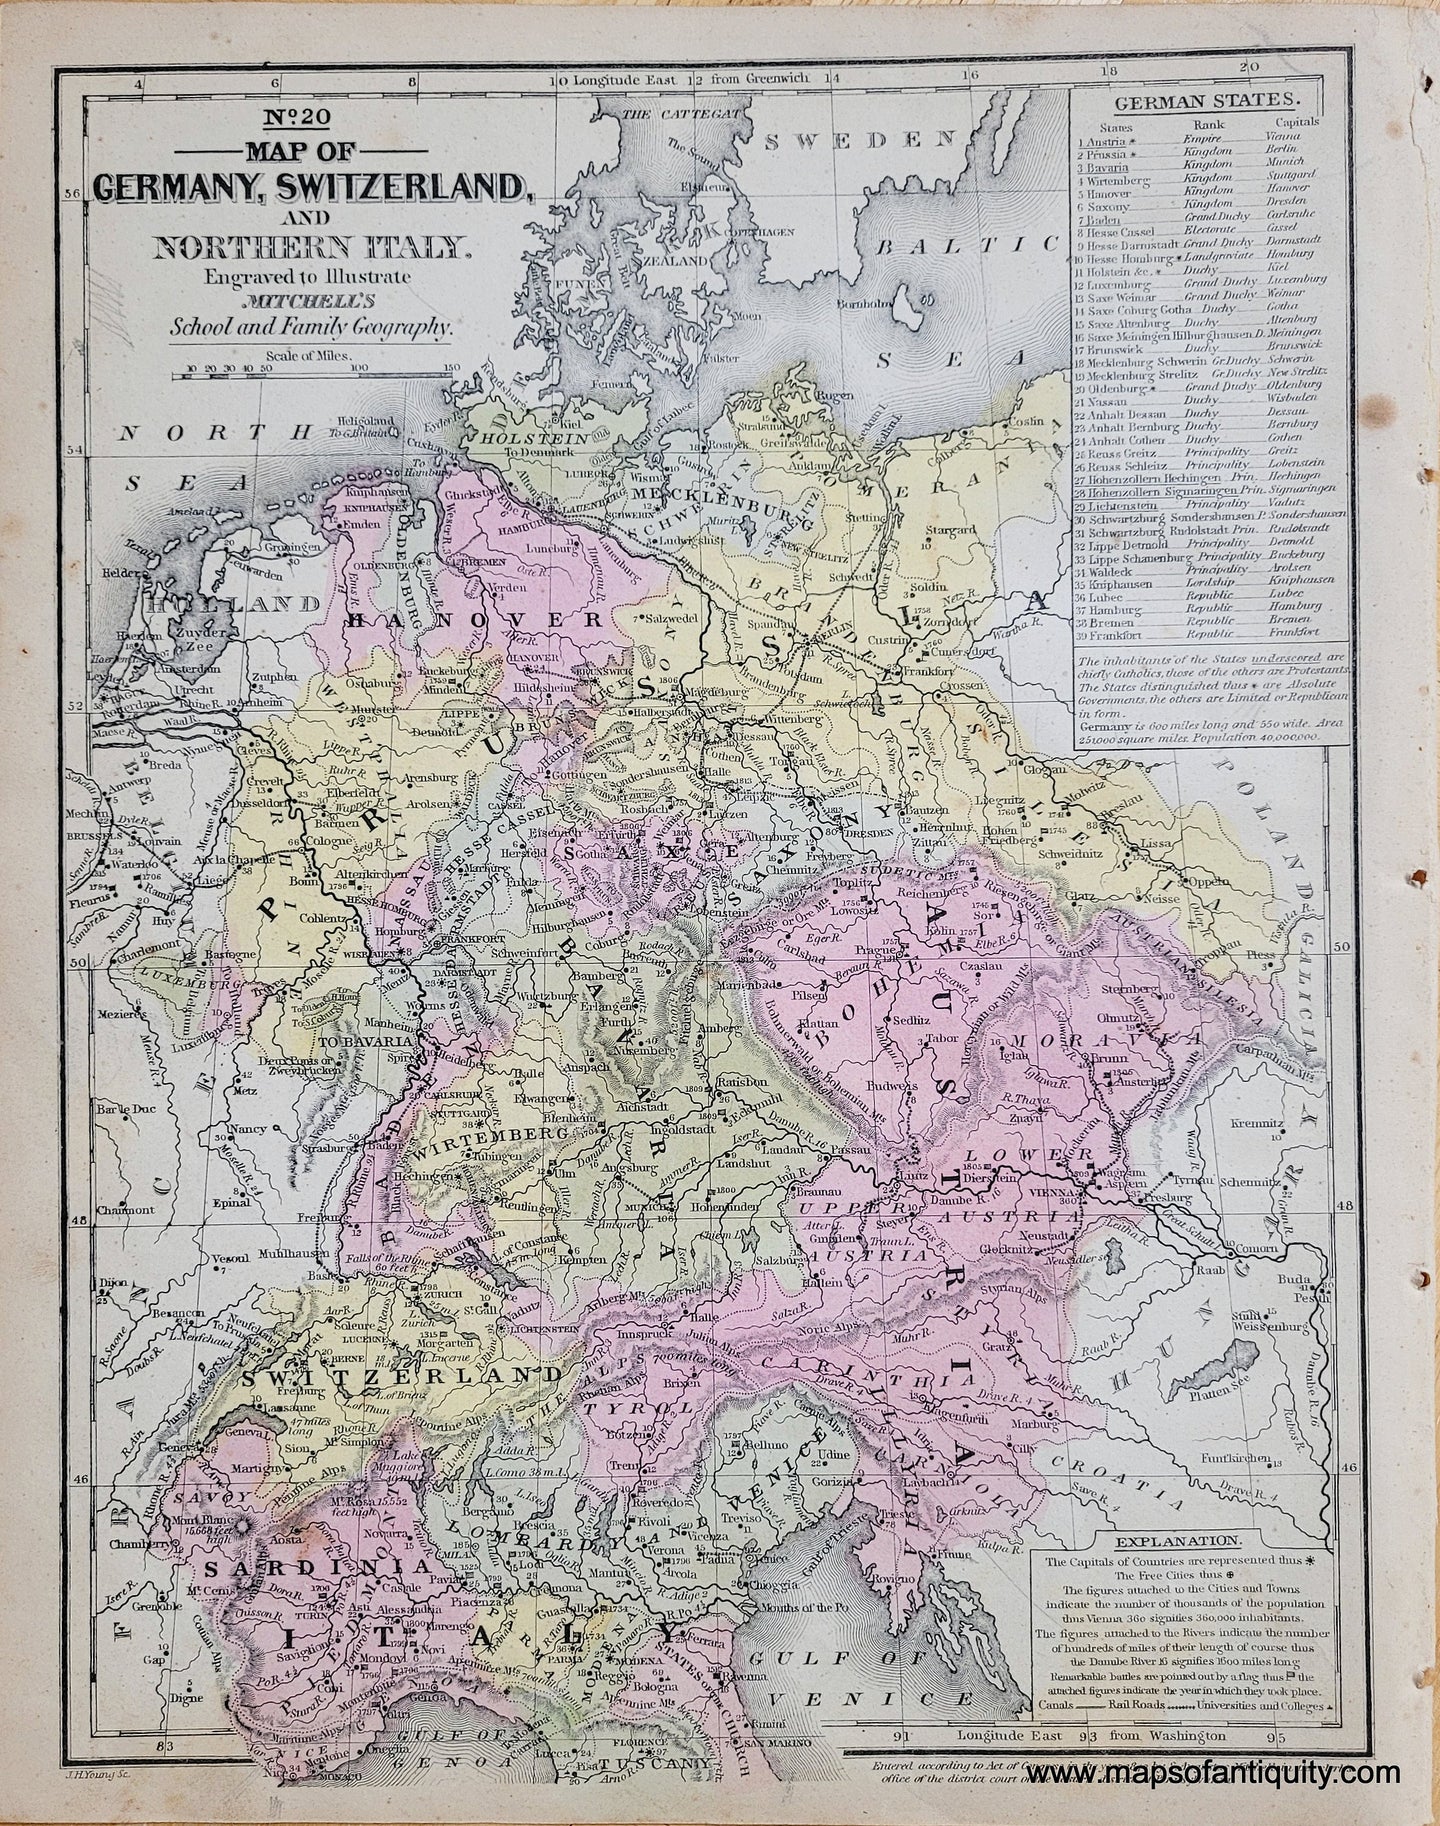 Genuine-Antique-Map-No-20-Map-of-Germany-Switzerland-and-Northern-Italy-Engraved-to-Illustrate-Mitchells-School-and-Family-Geography-Germany-Switzerland-Italy-1851-Mitchell-Maps-Of-Antiquity-1800s-19th-century